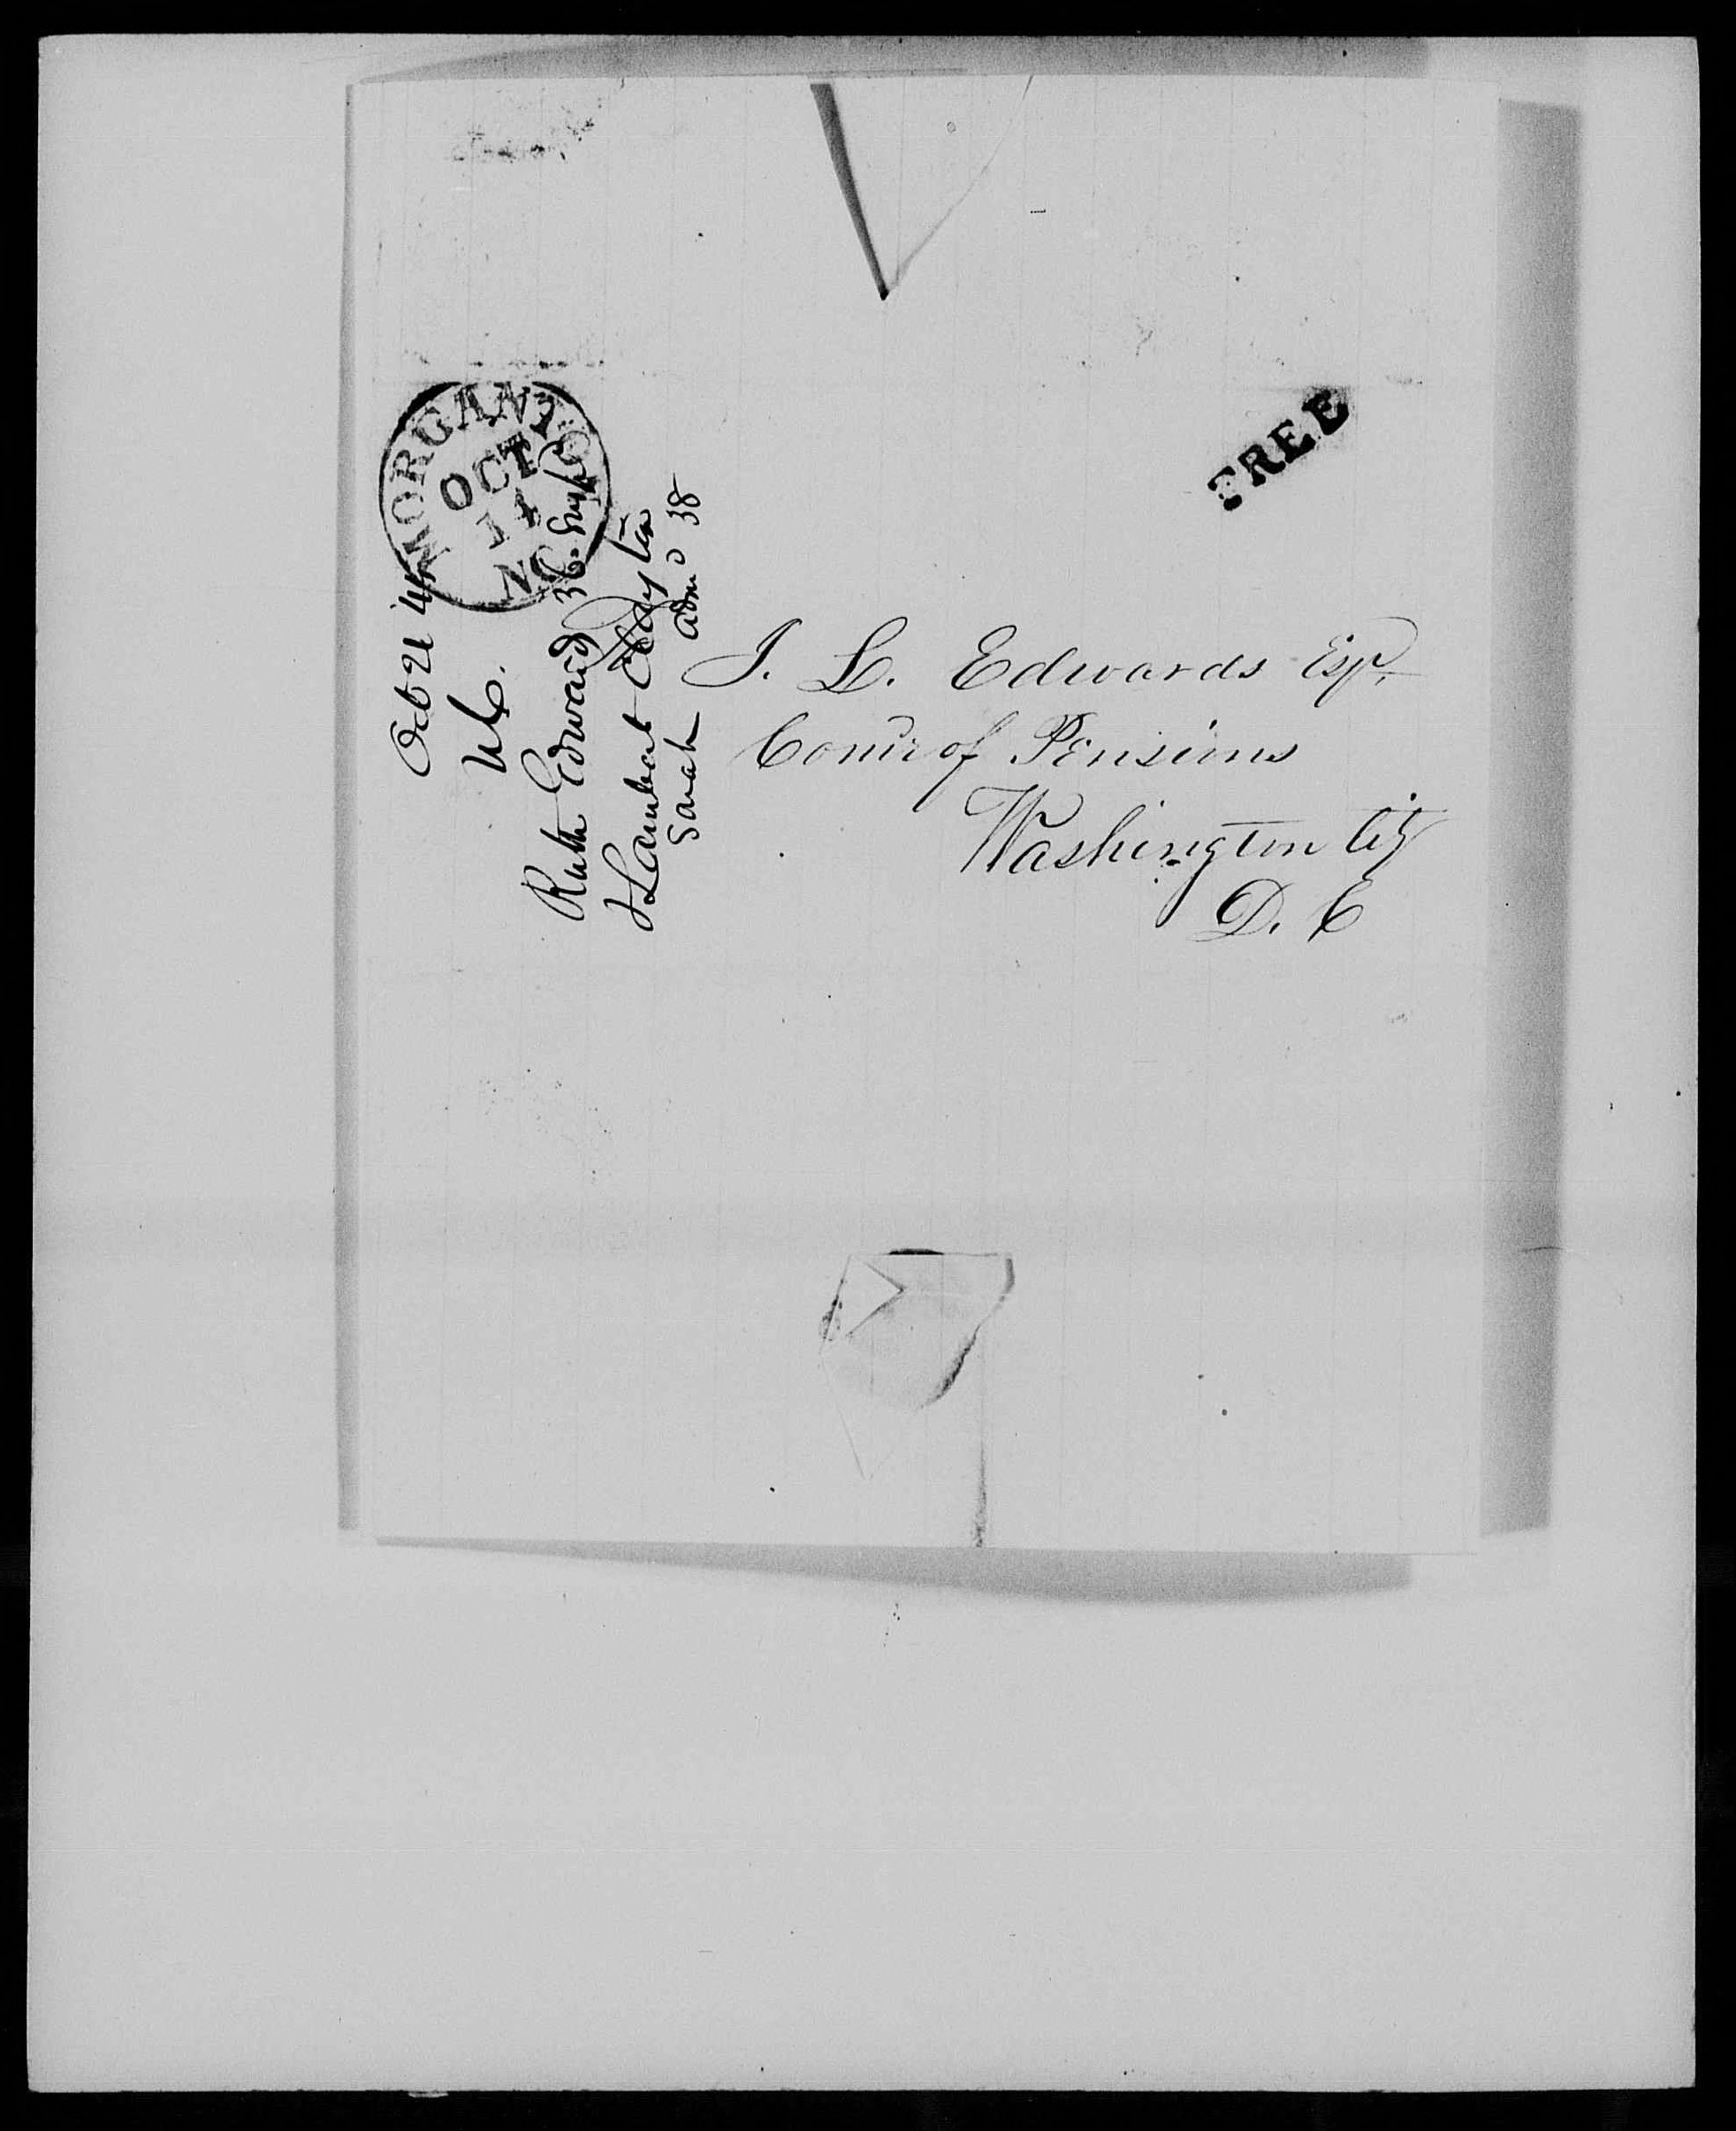 Letter from Sylvester Bettis to James L. Edwards, 13 October 1844, page 2